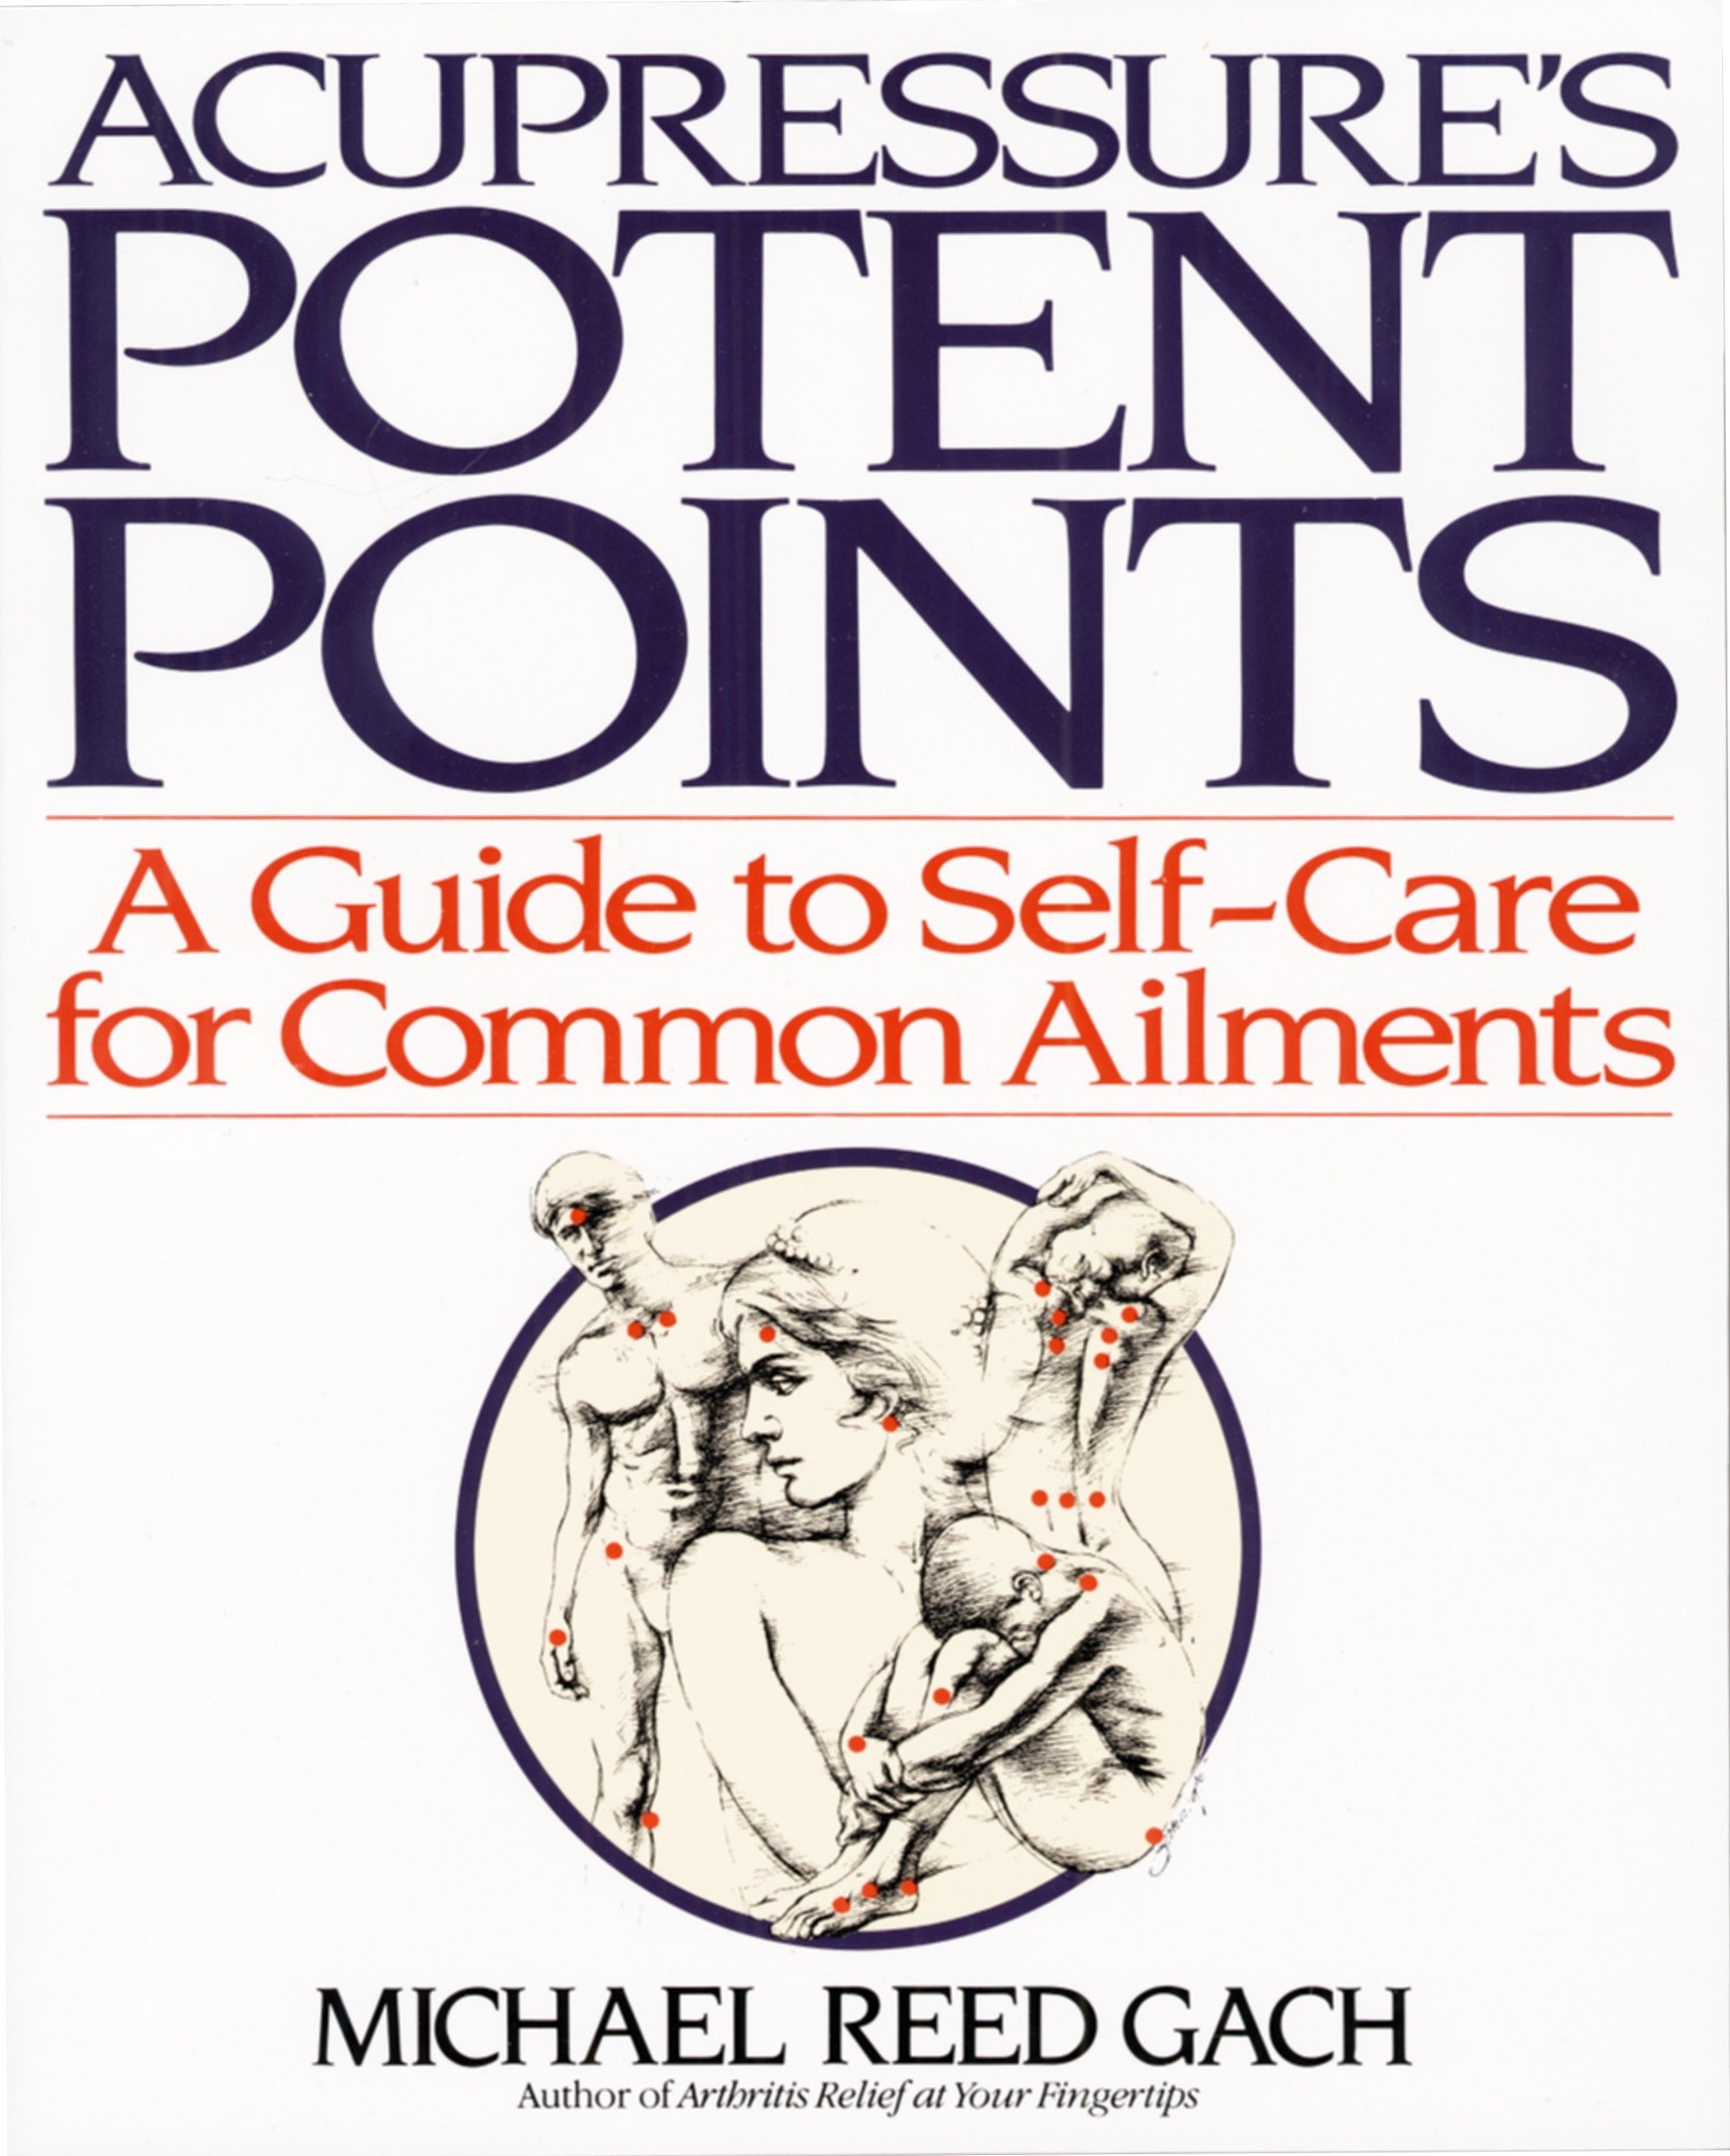 Ebook Acupressures Potent Points A Guide To Self Care For Common Ailments By Michael Reed Gach